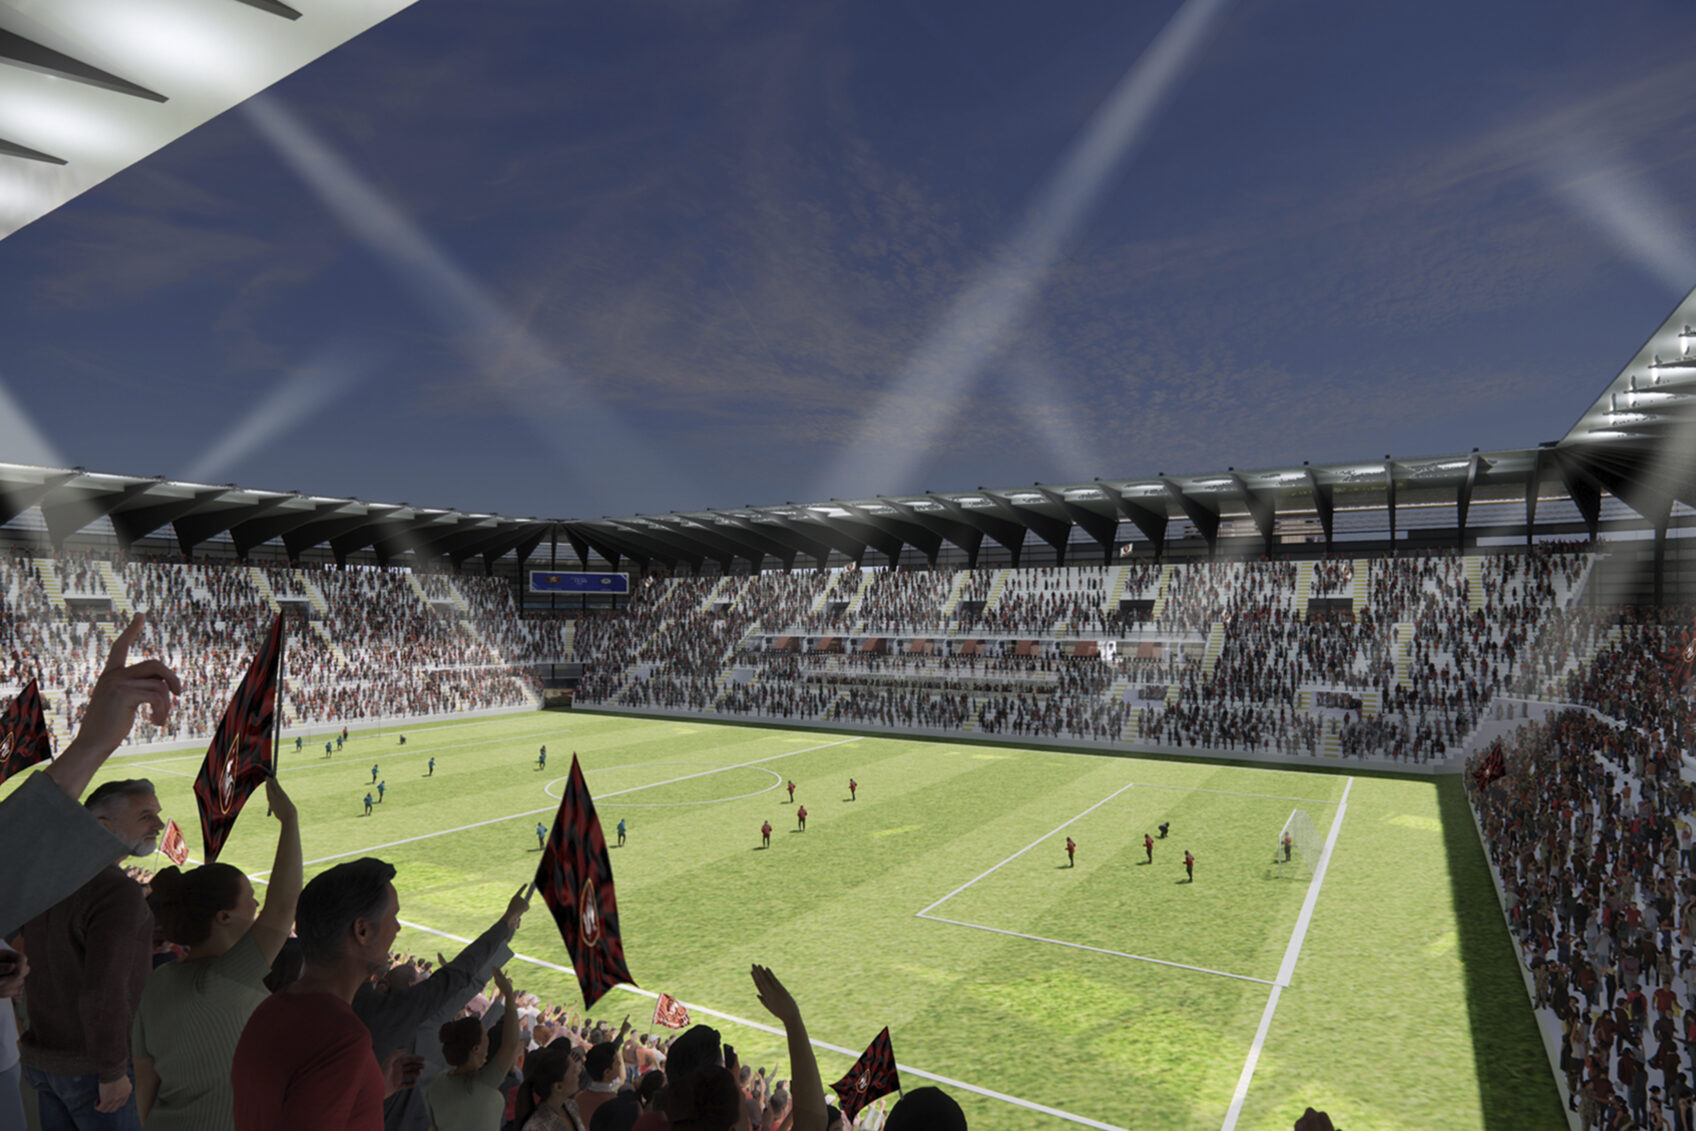 Rendering view of grandstands and playing field new Salerno Arechi Stadium